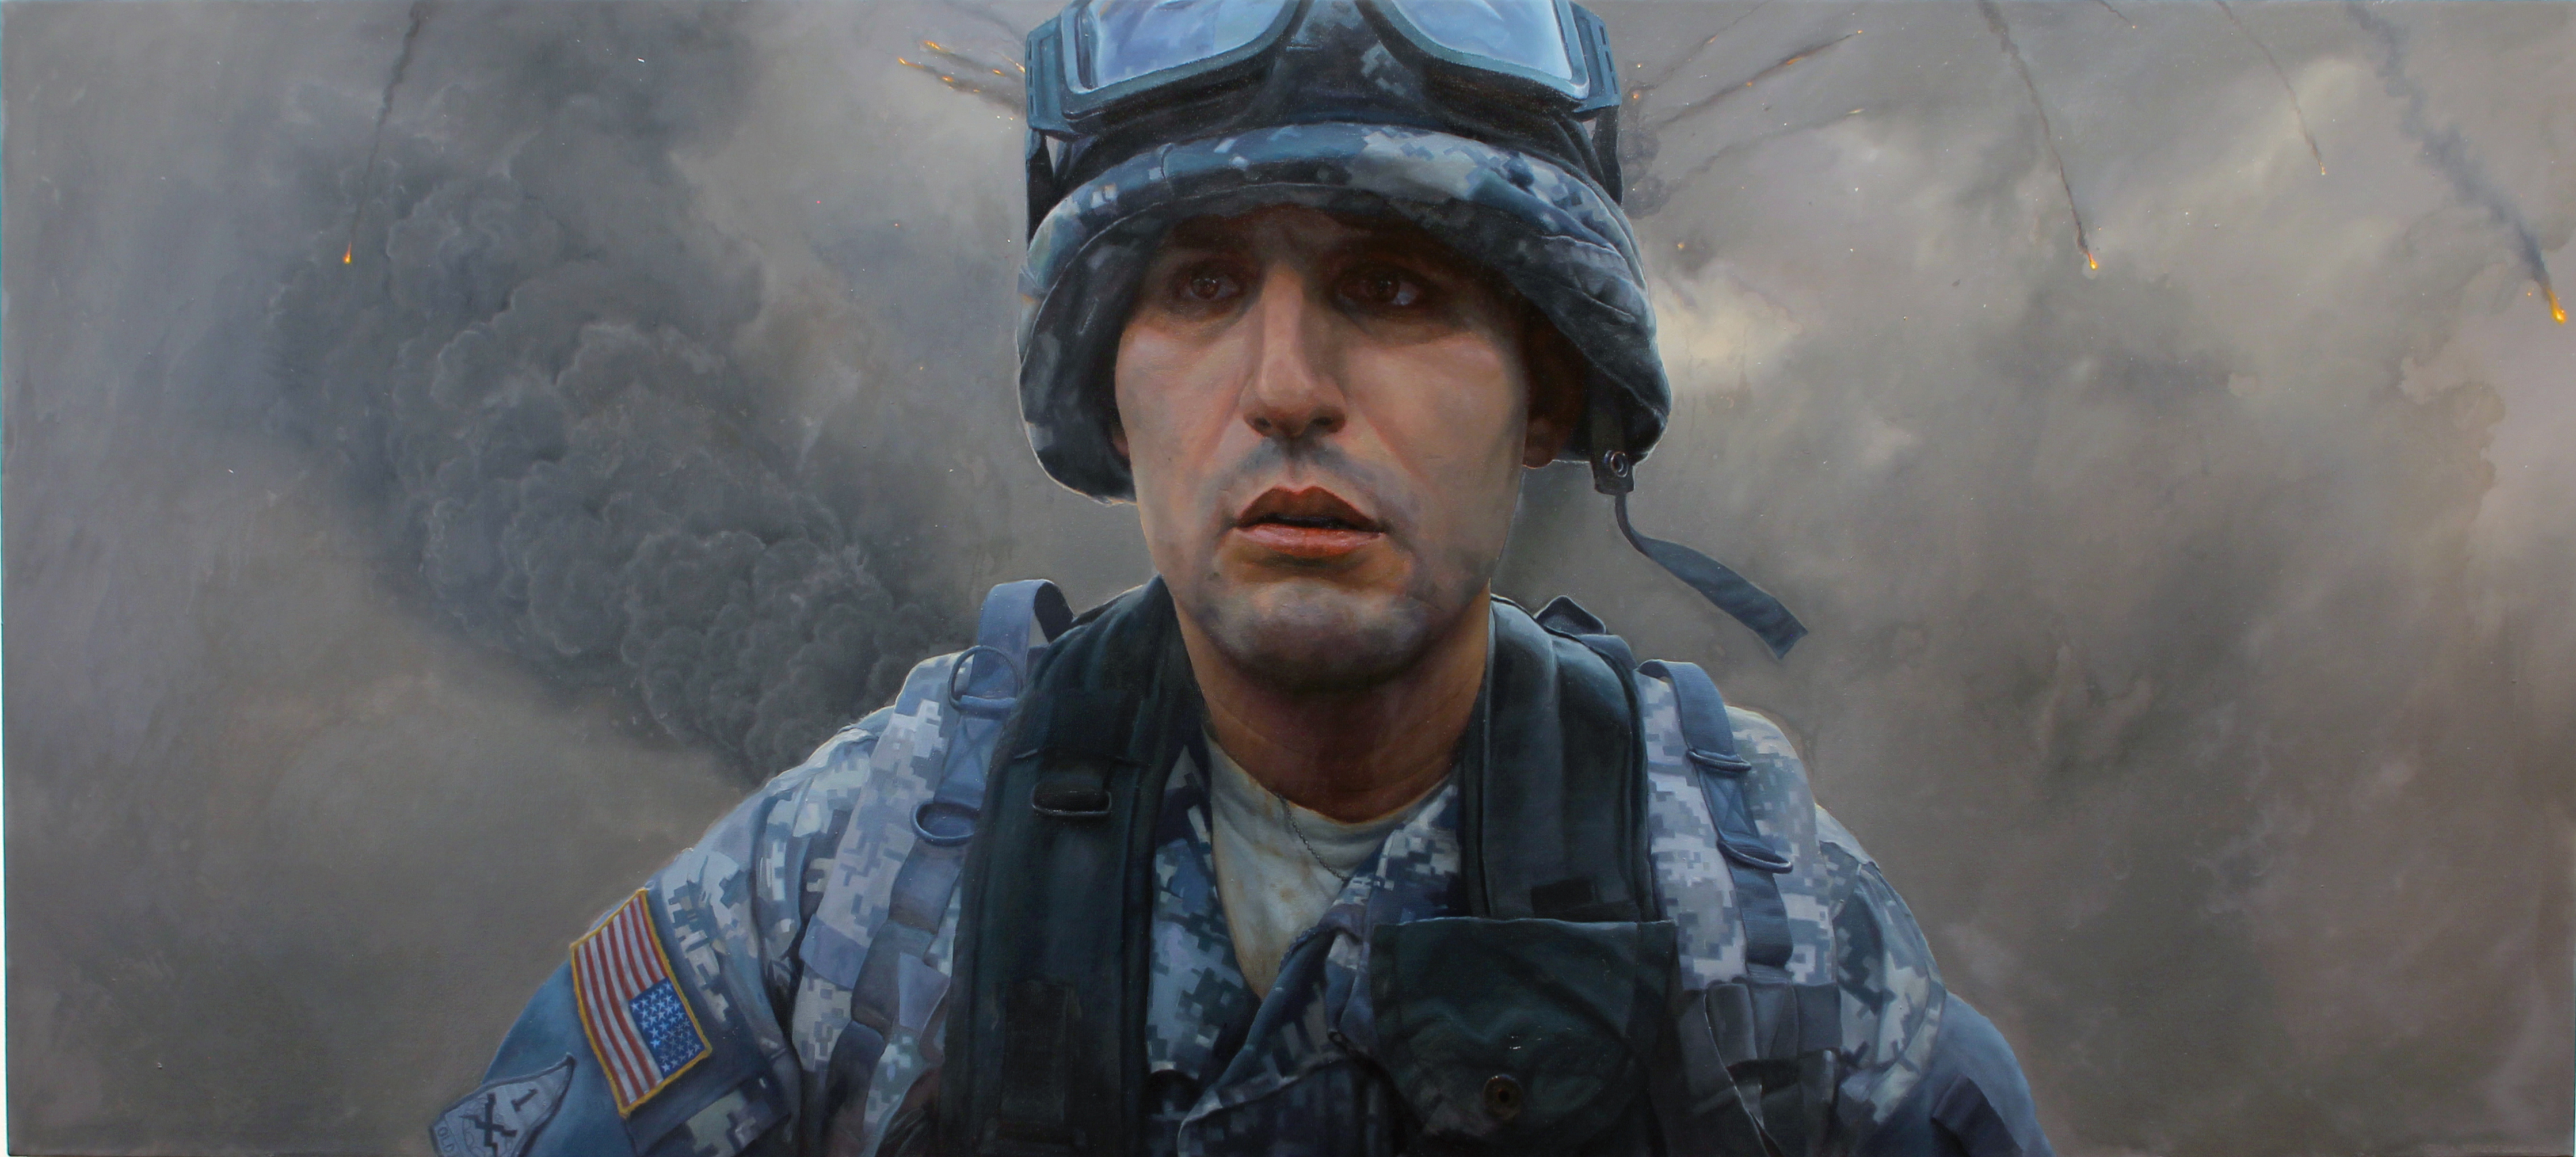 Painting of a soldier running away from an explosion in an American military uniform